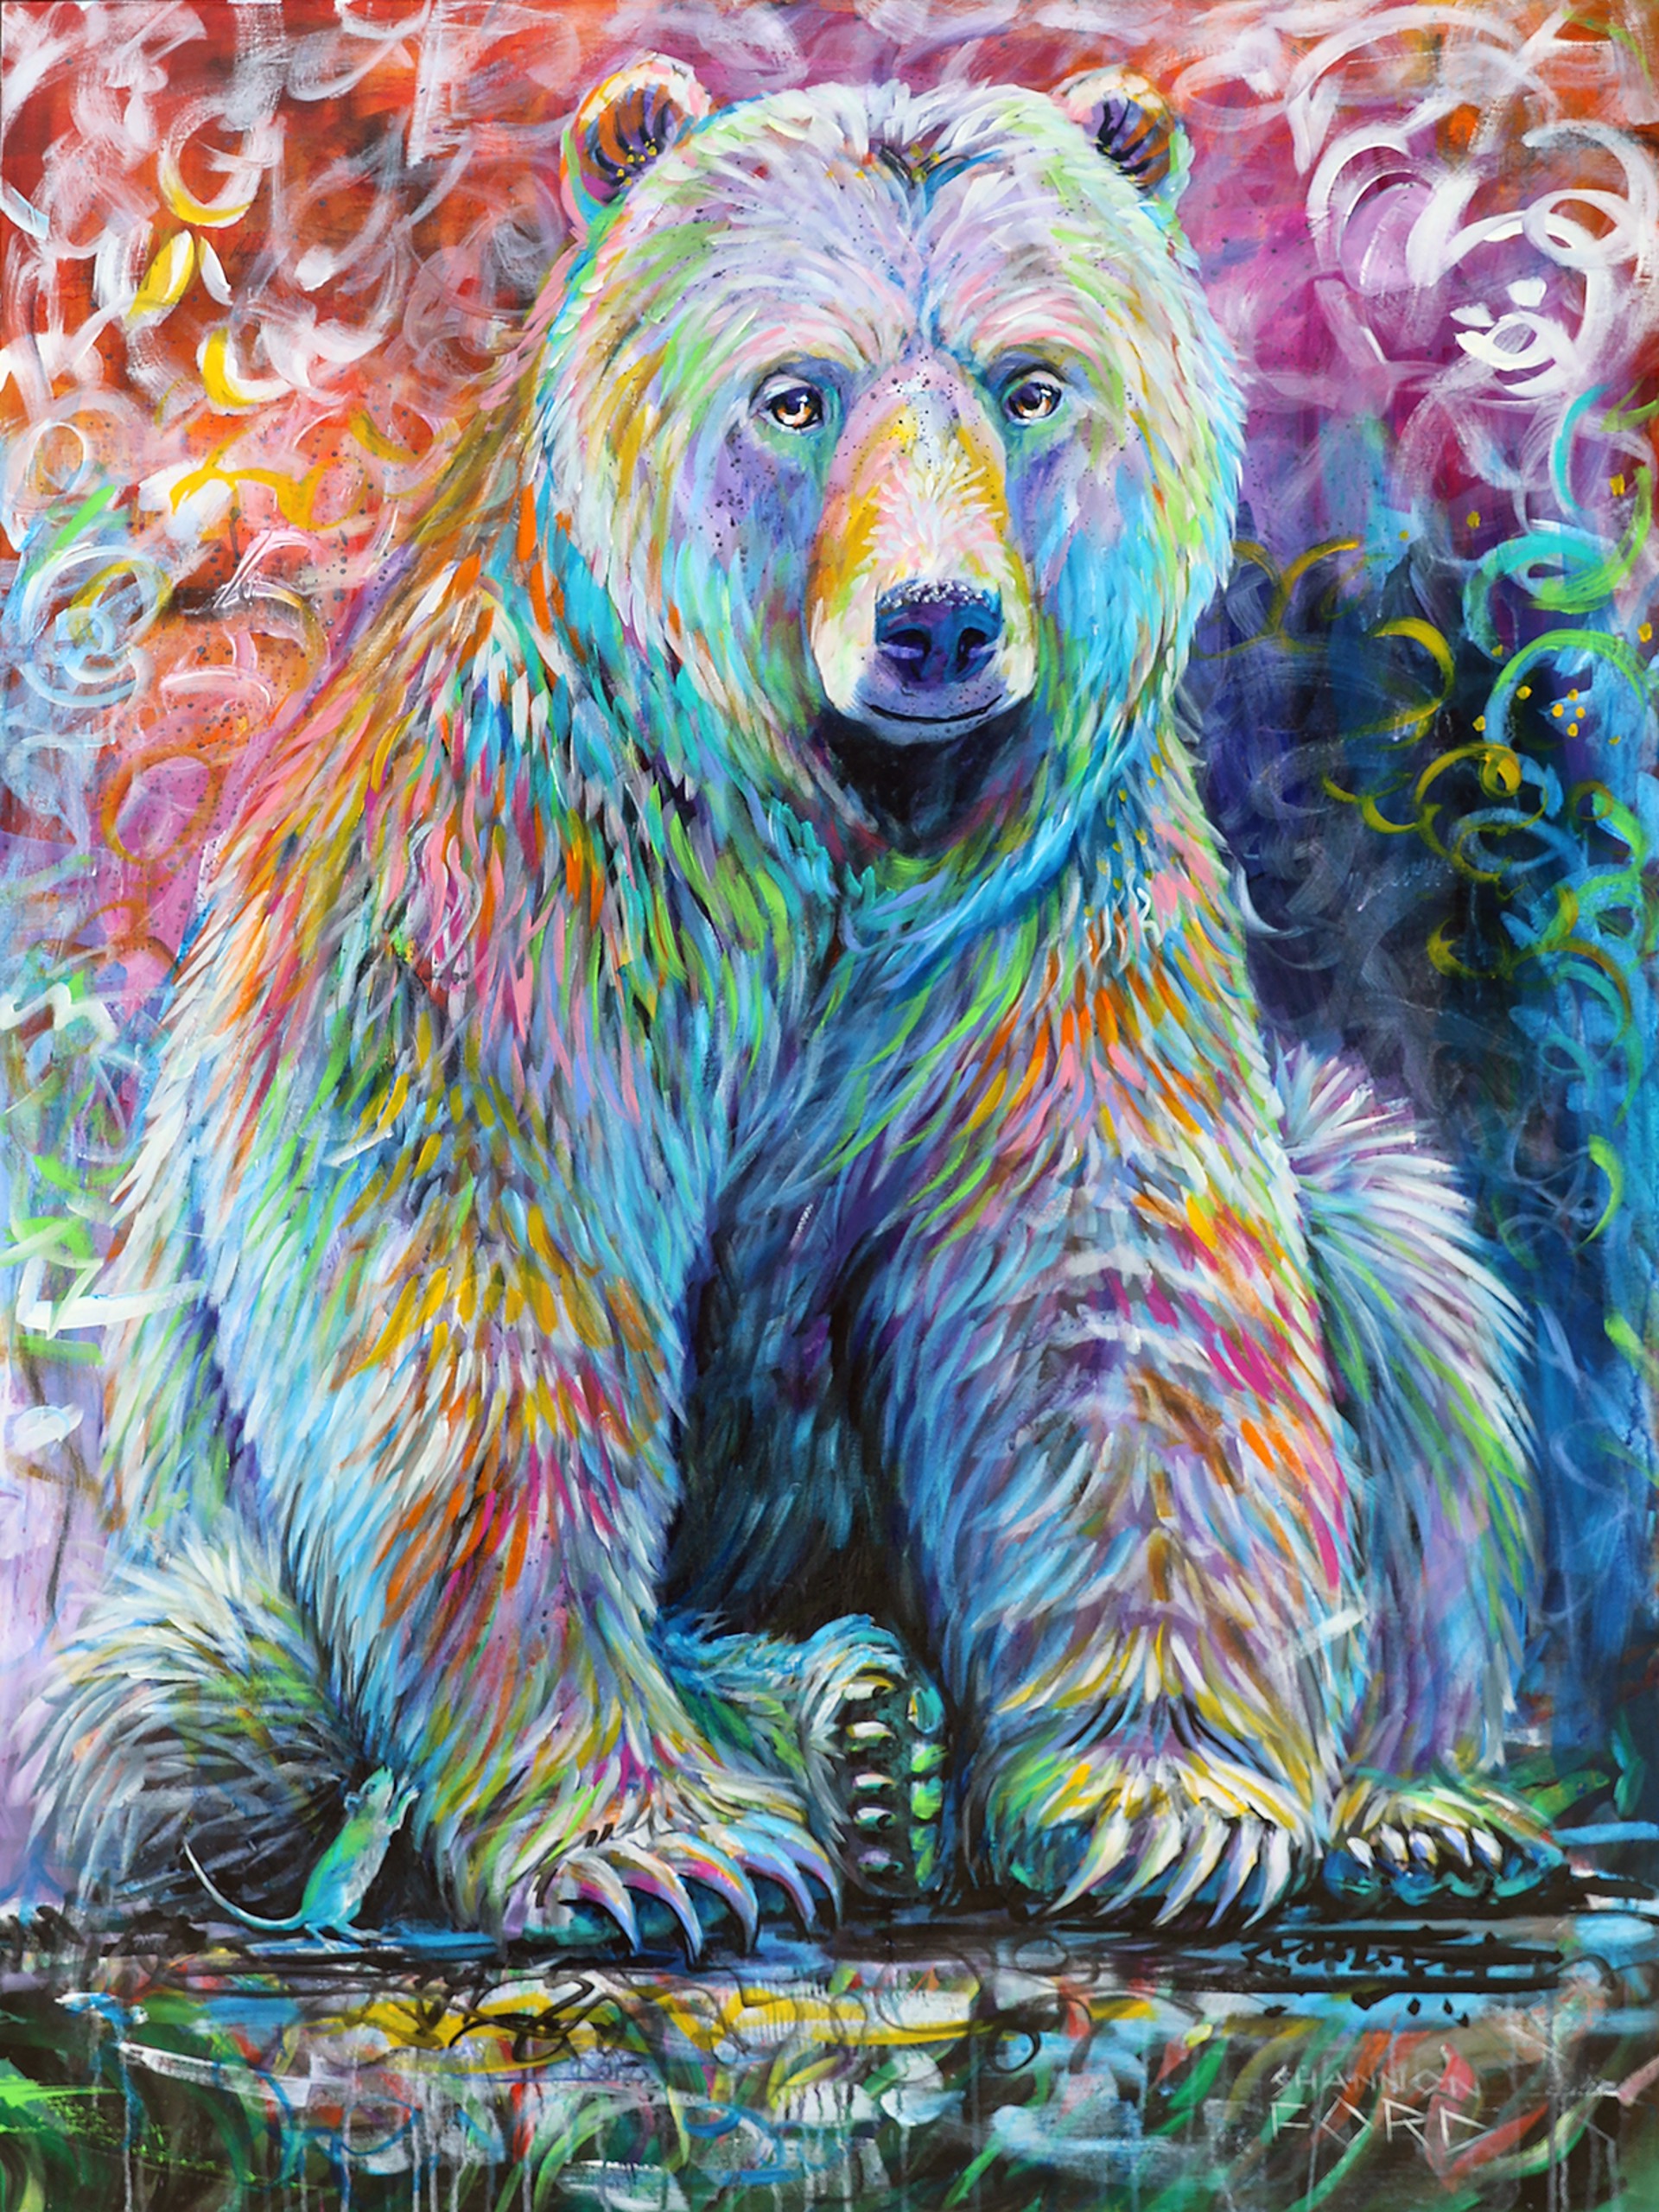 Some Bears Like Some Time Alone, with Time to Think and Space to Roam by Shannon Ford